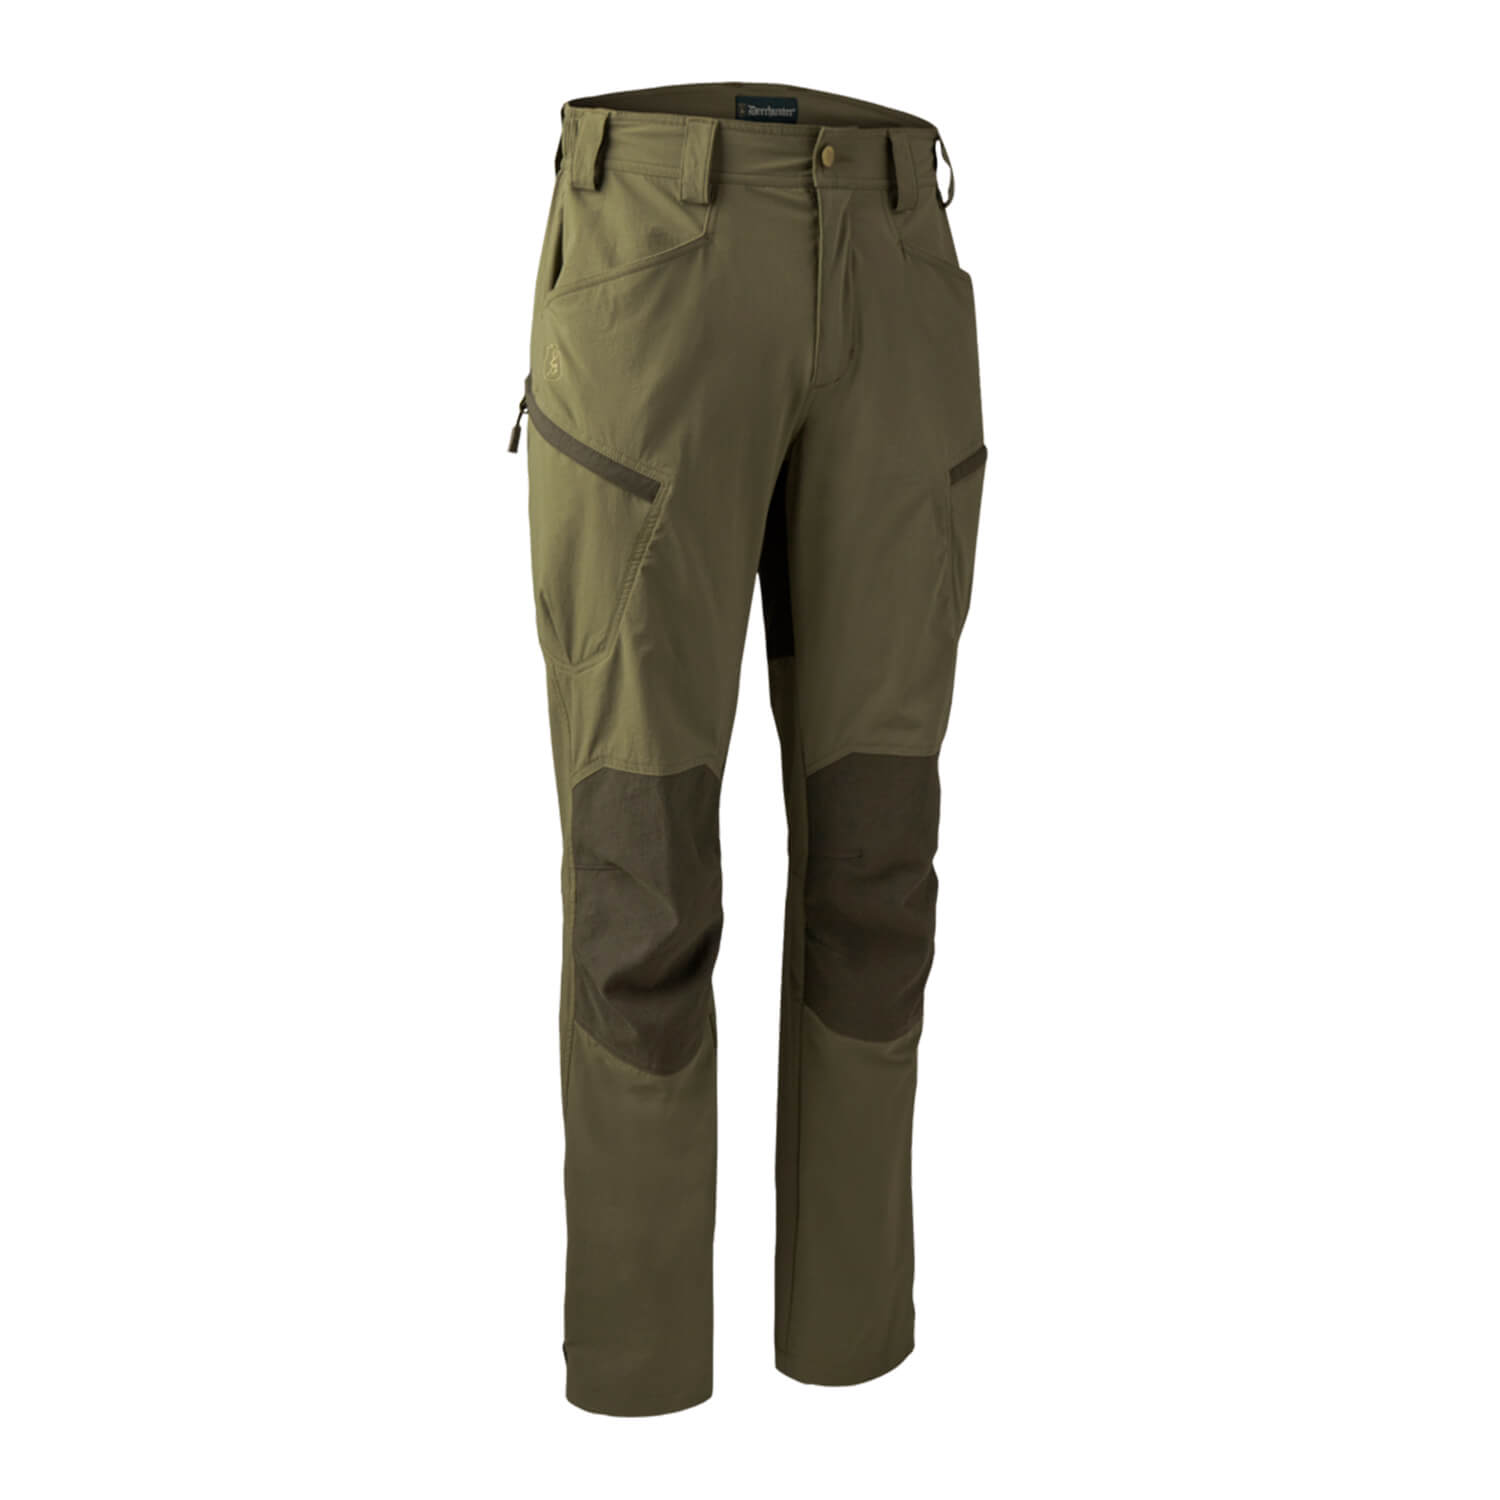 Deerhunter Jagdhose Anti-Insect - Outlet